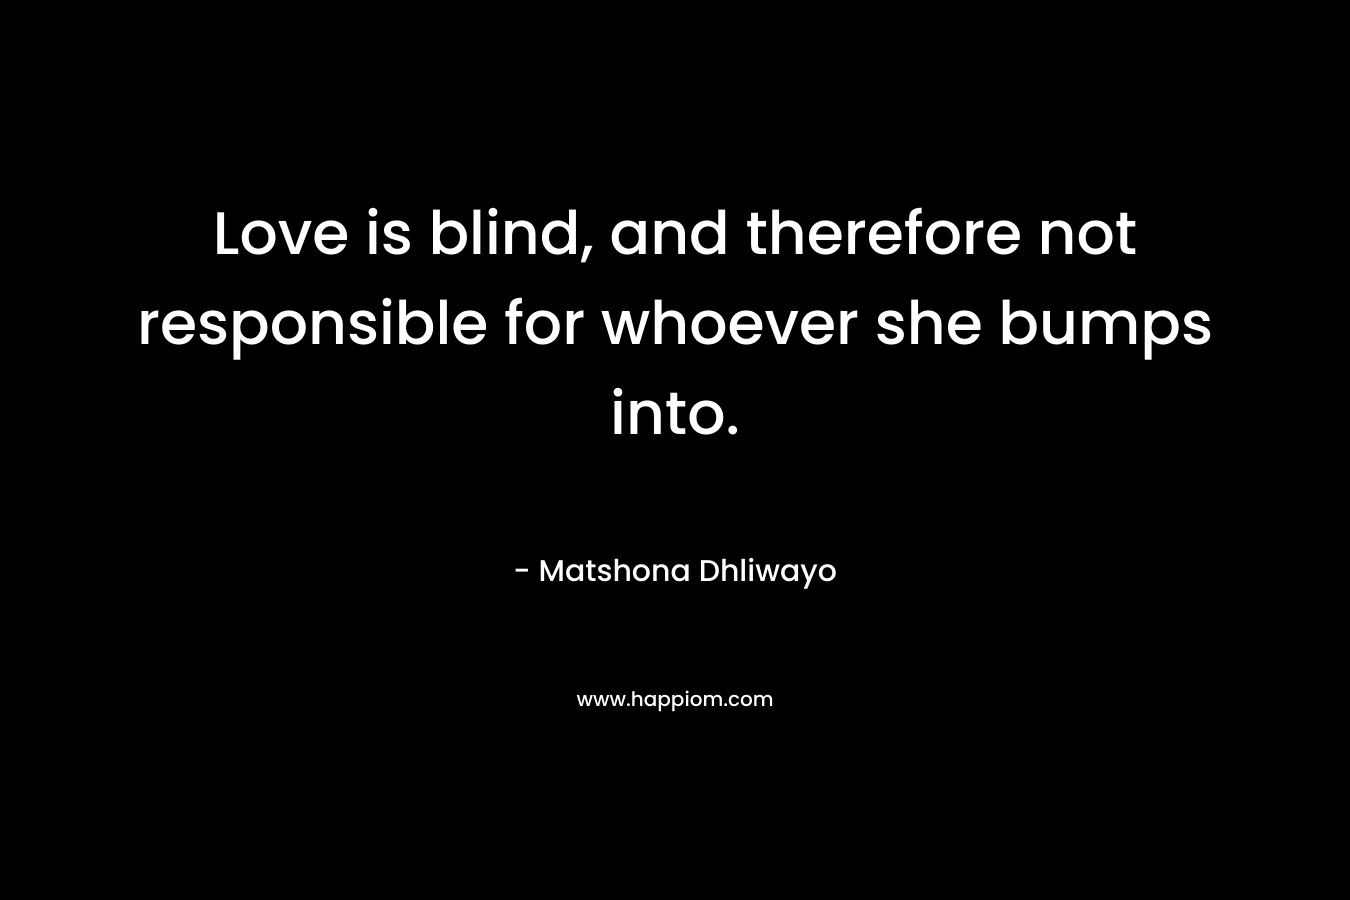 Love is blind, and therefore not responsible for whoever she bumps into.